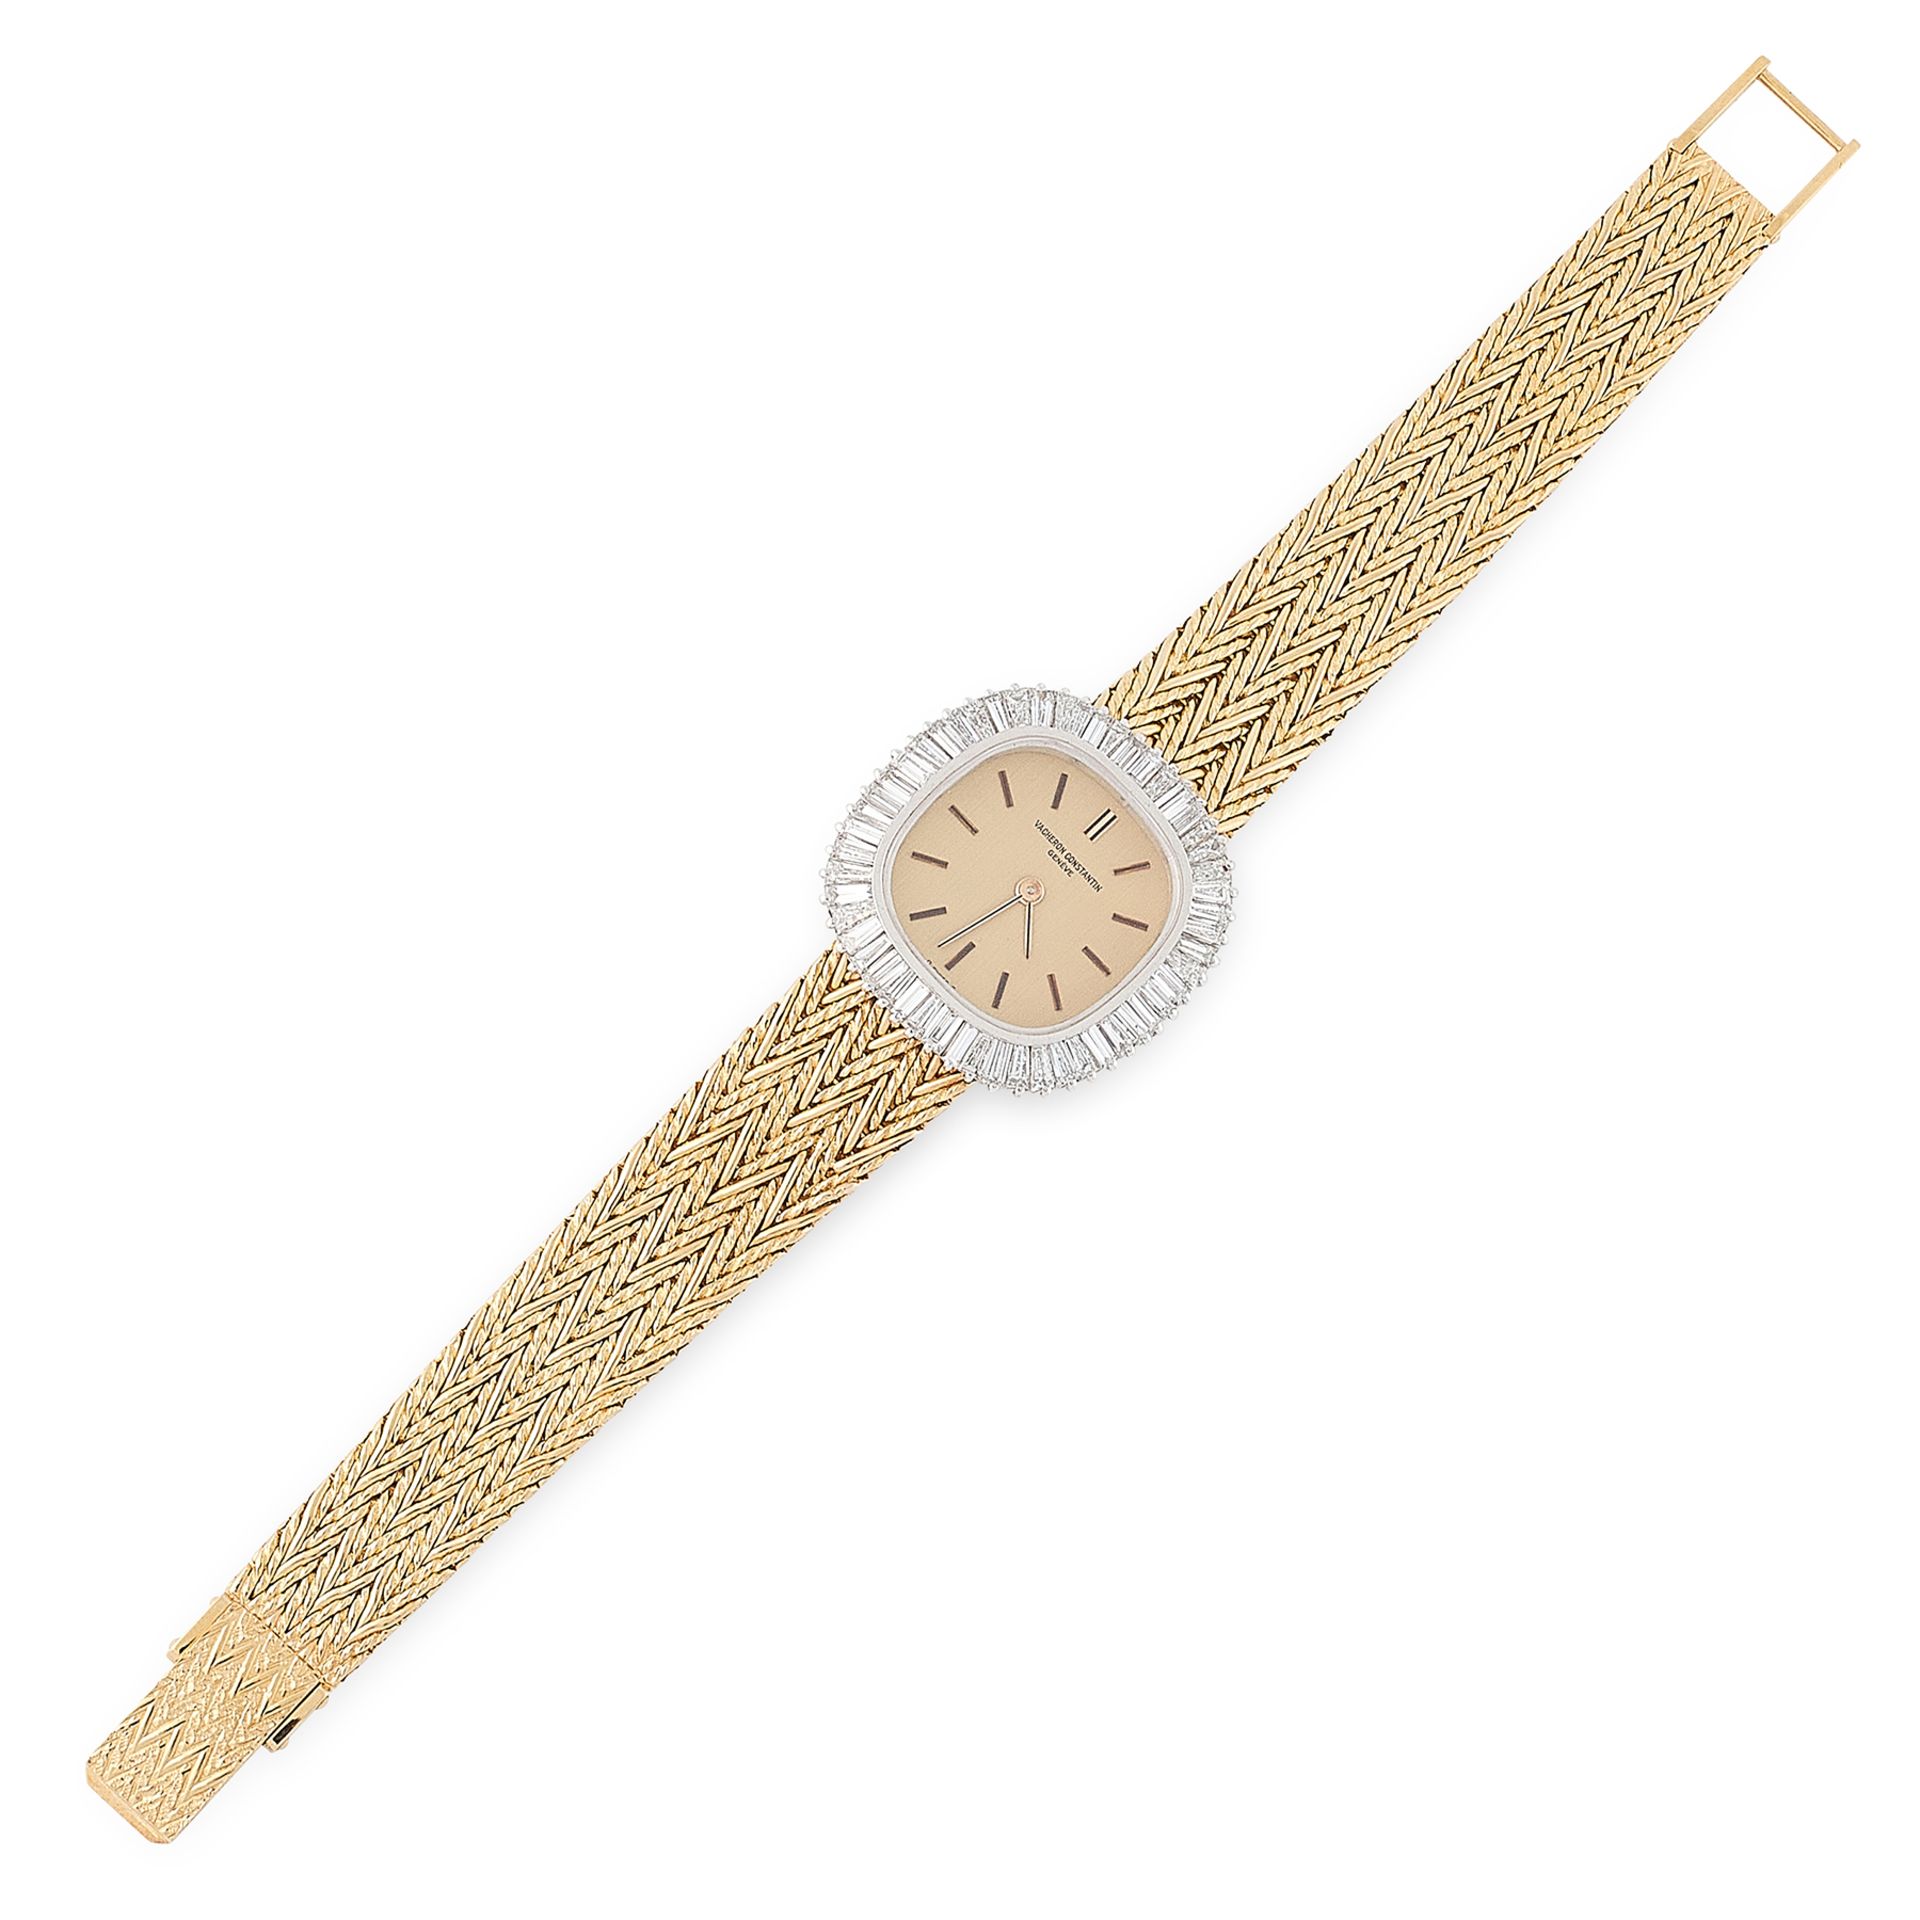 A LADIES DIAMOND WRIST WATCH, VACHERON CONSTANTIN in 18ct yellow gold, with gold dial in baguette